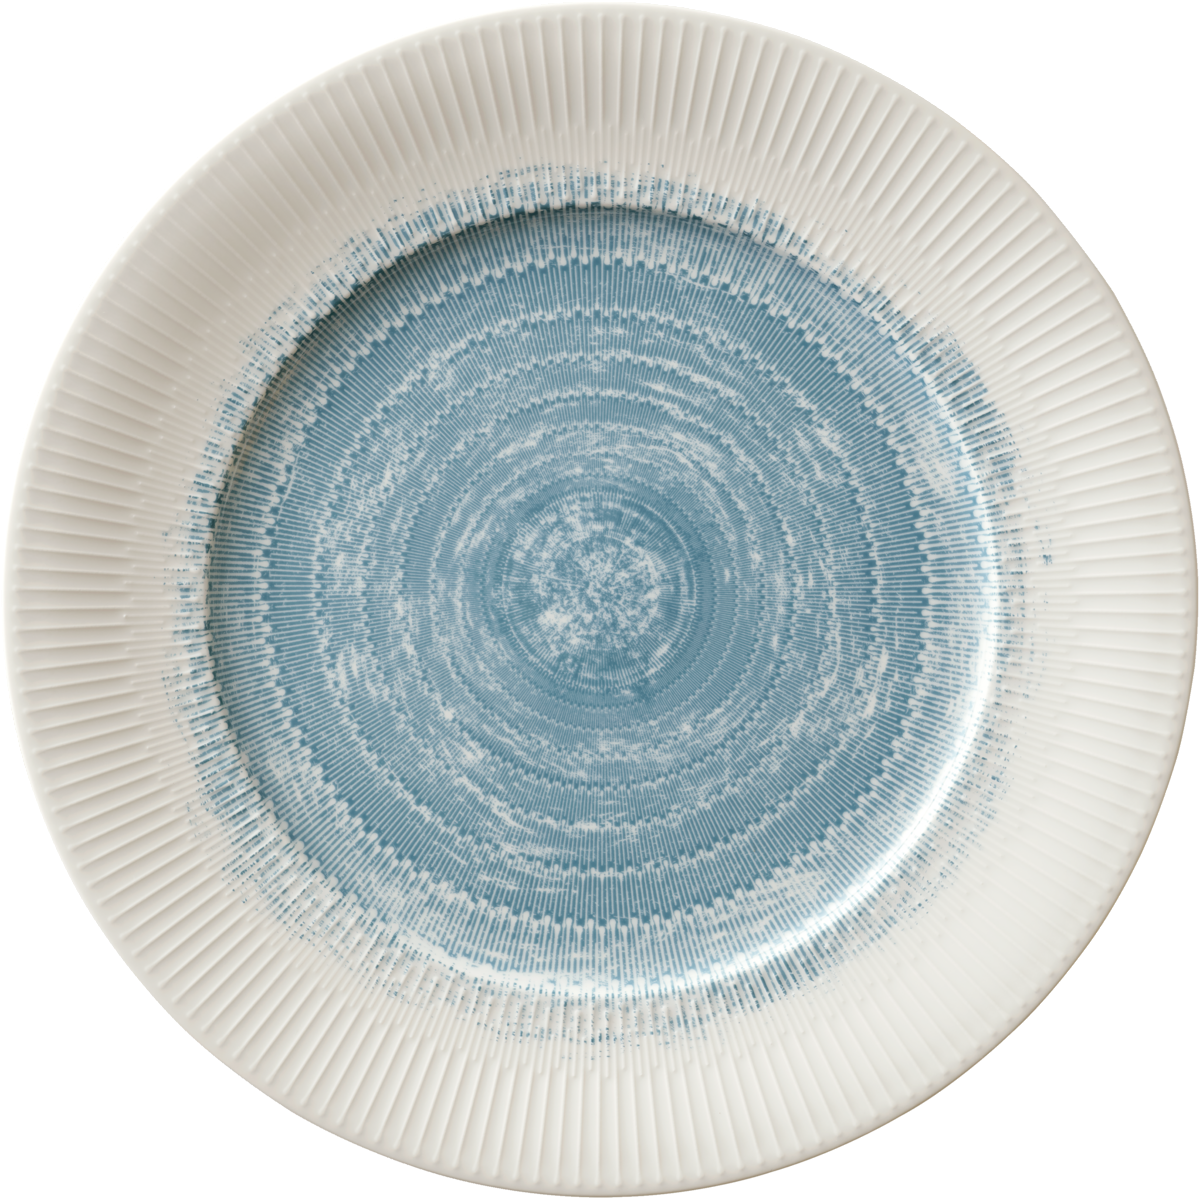 Plate flat round with rim embossed 28cm